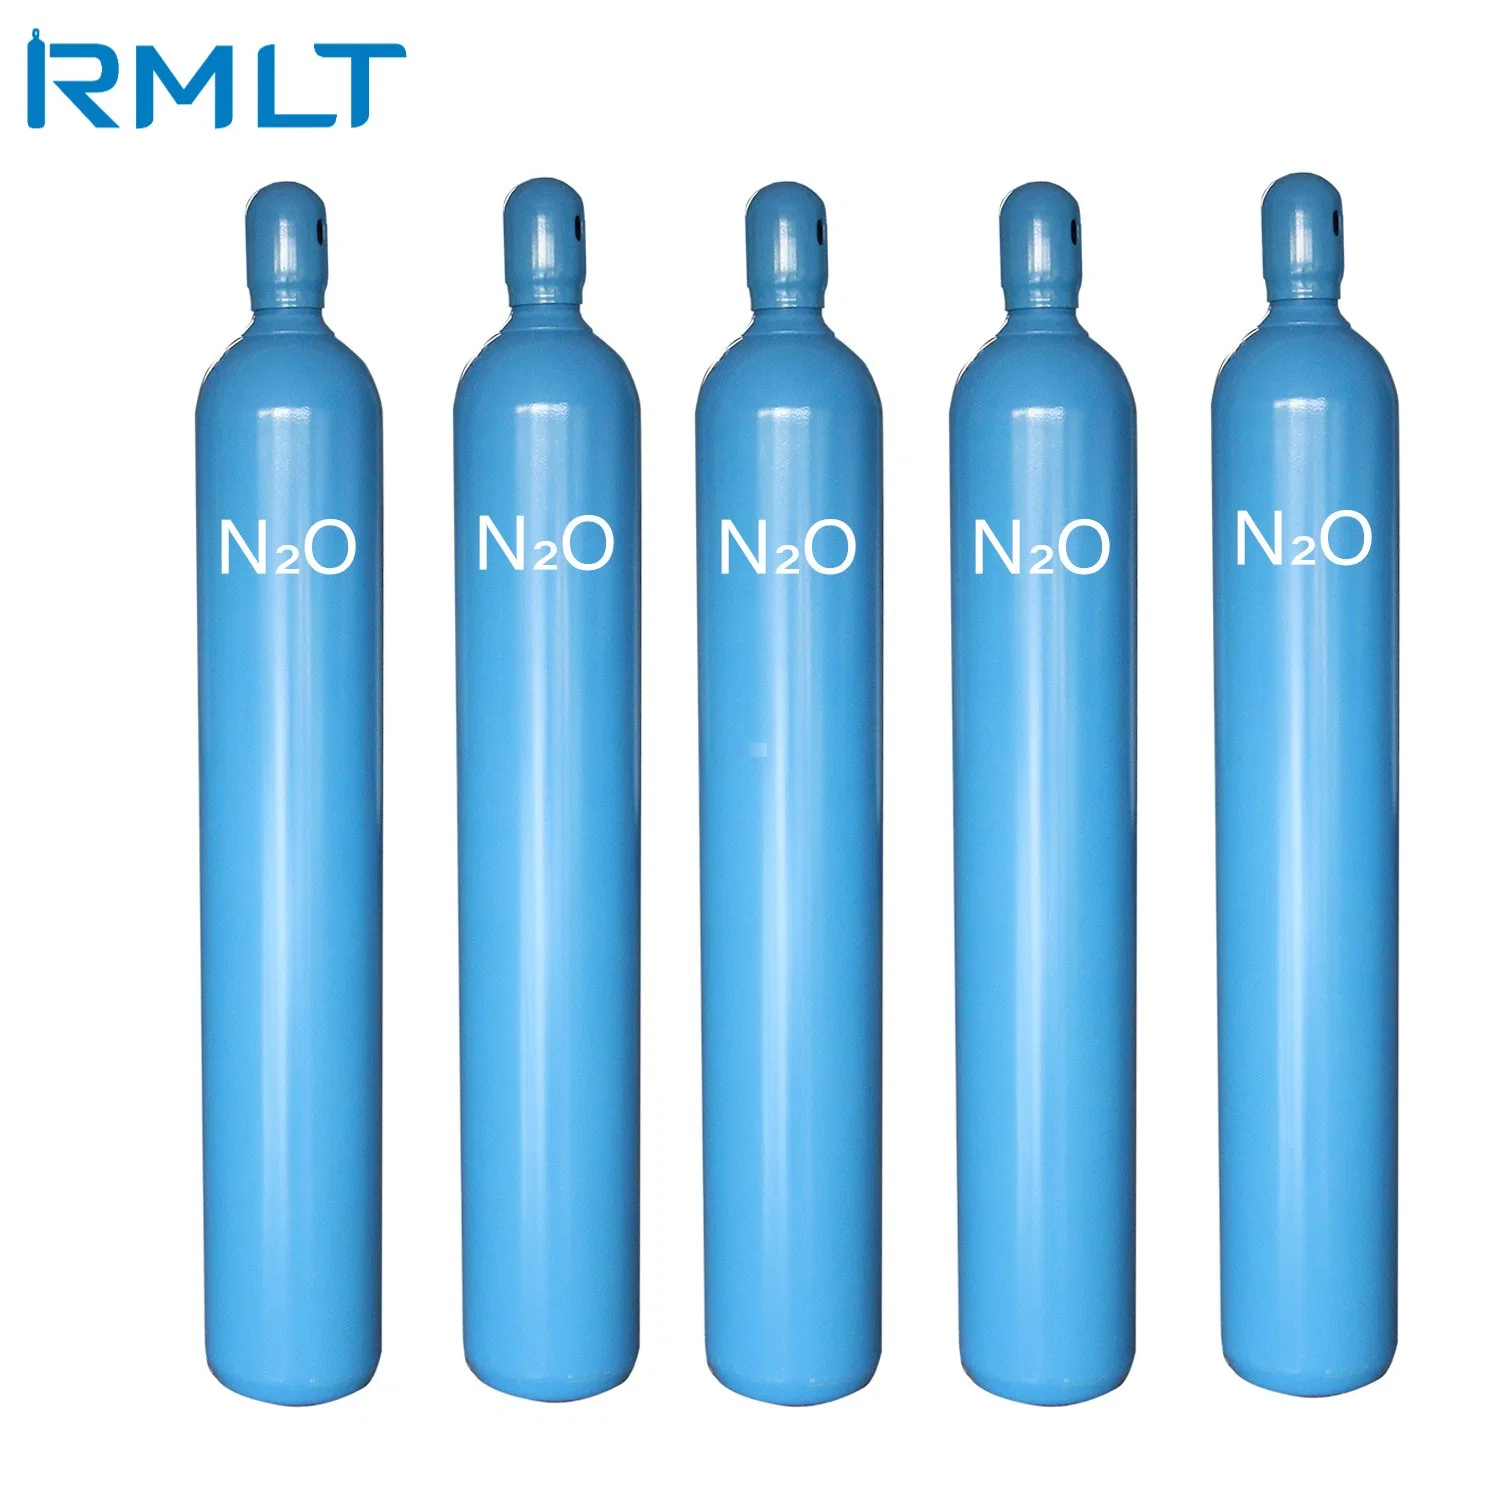 China Supply Industrial Grade Medical Gas 10L/20L/40L/50L Nitrous Oxide N2o Laughing Gas